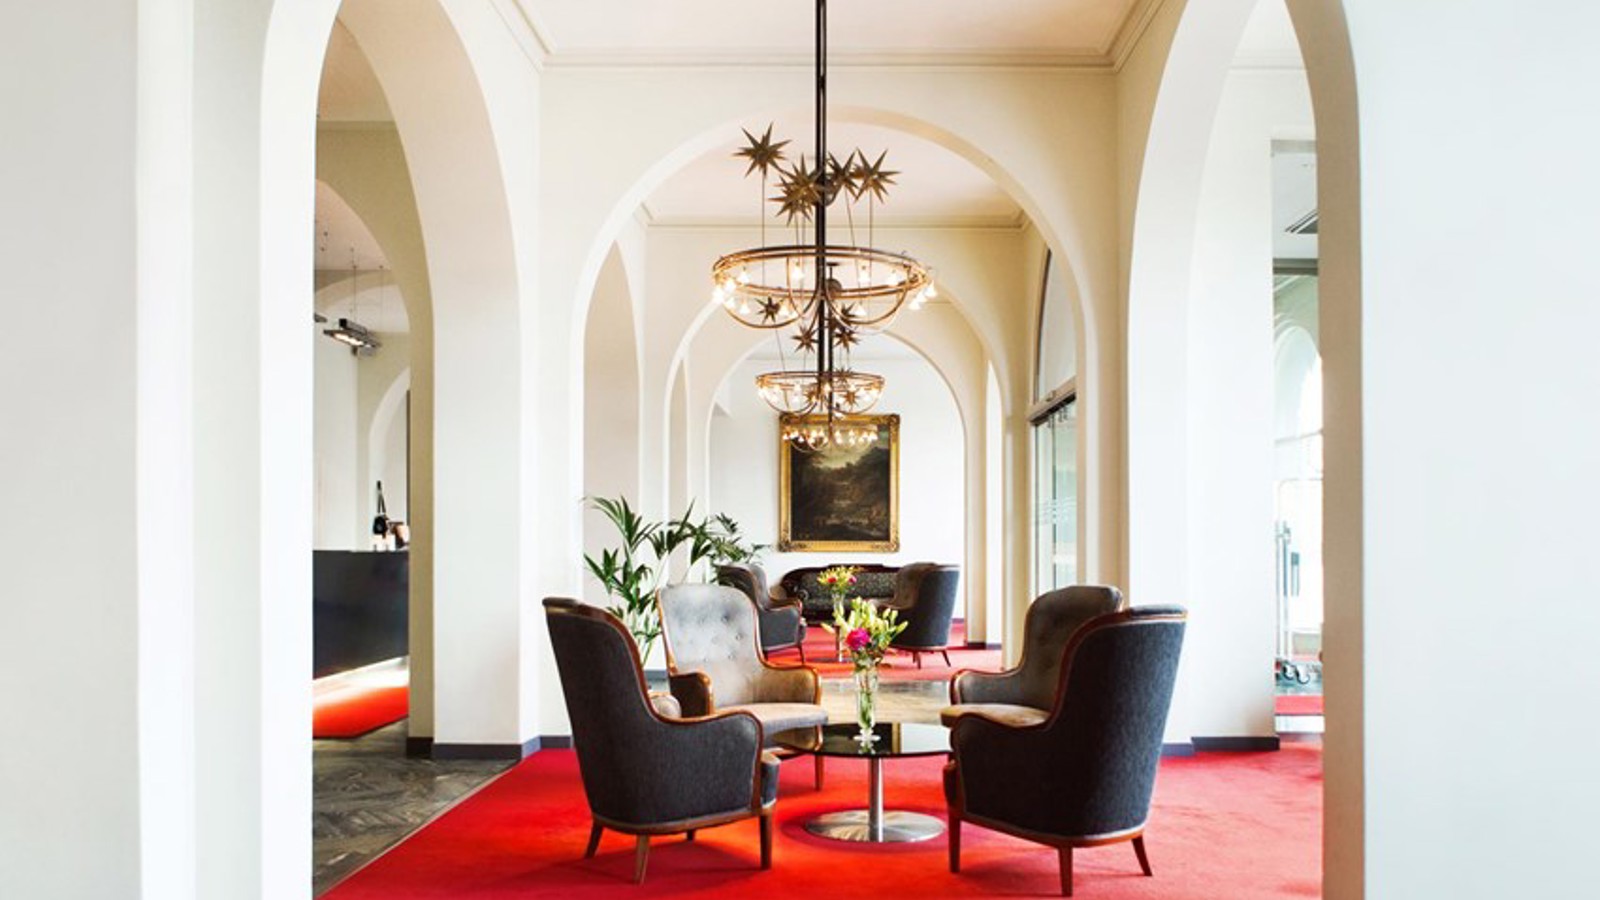 Light room with armchairs, white walls, red rug and arched doorways